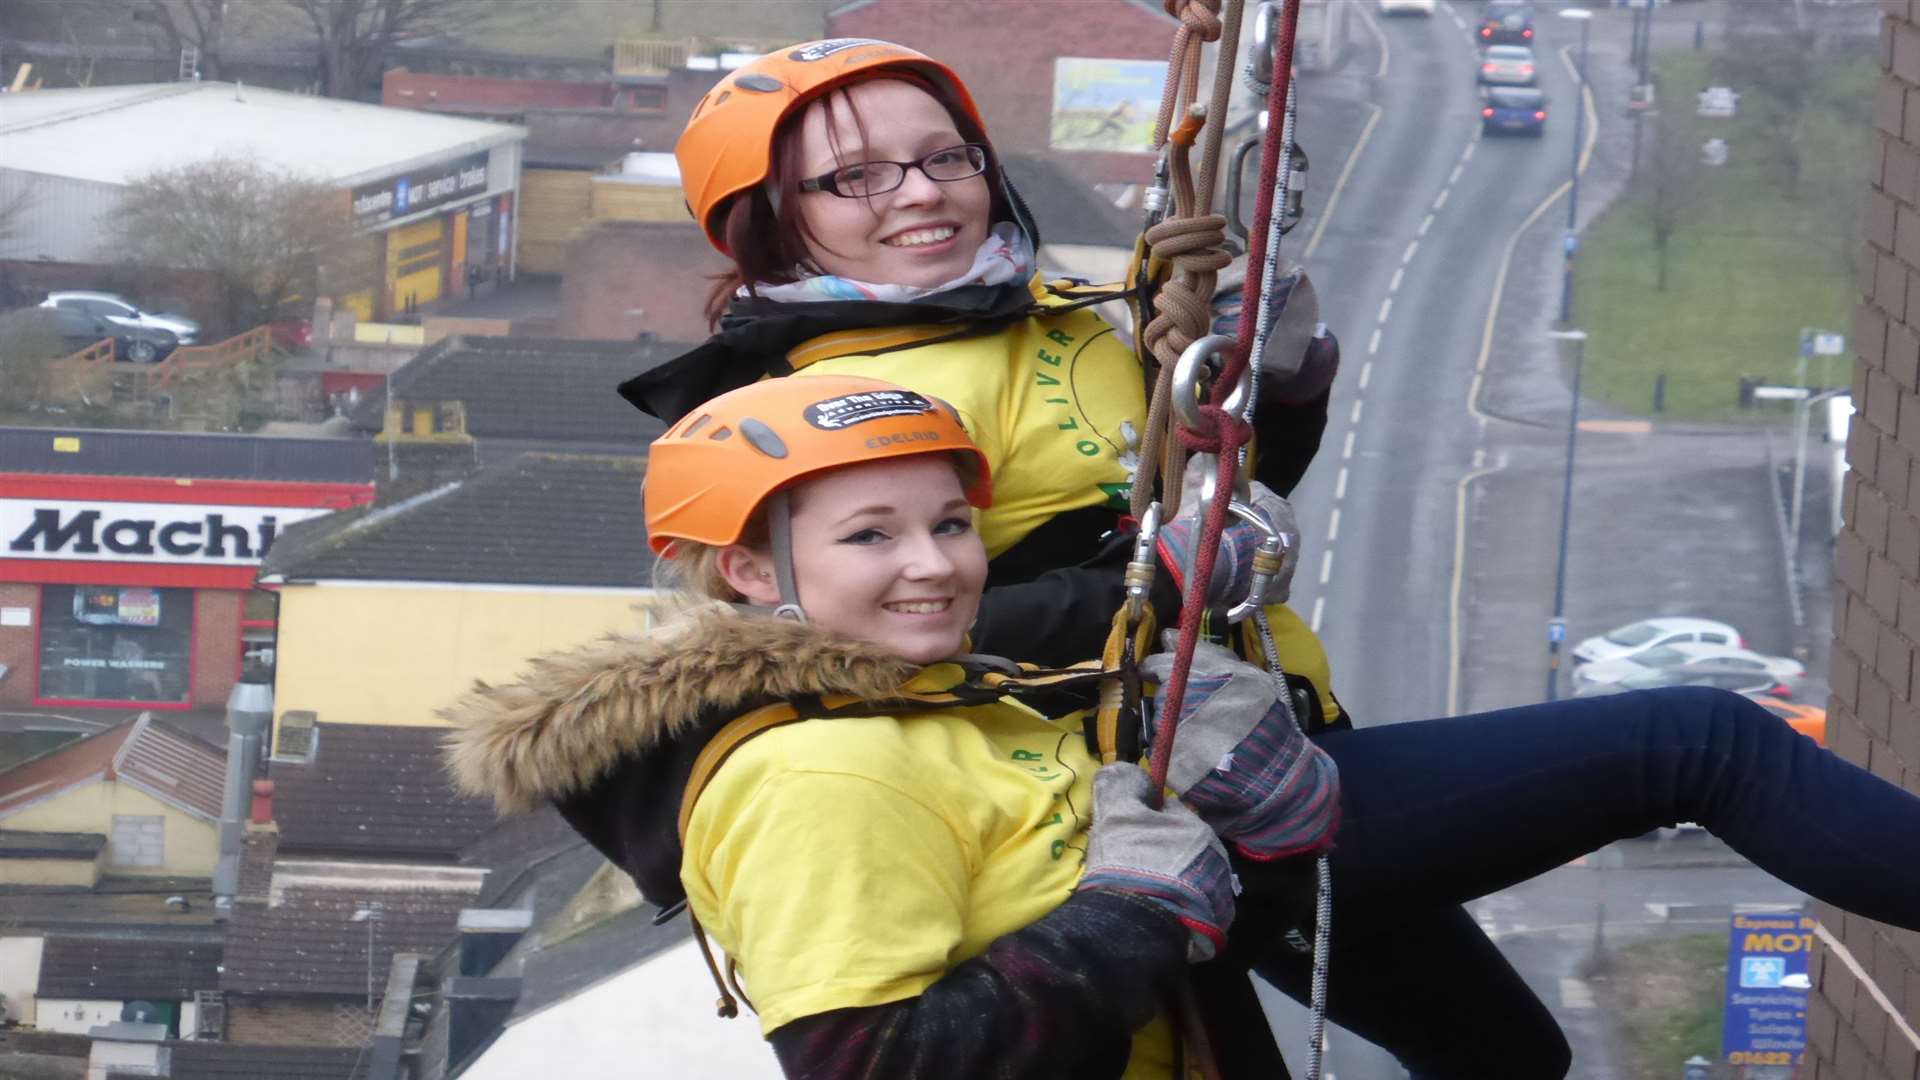 Abi Hankins of Sittingbourne and Daisy Hankins of Chatham took part in the KM abseil challenge at Miller House, Maidstone for the Oliver Fisher Special Care Baby Trust.